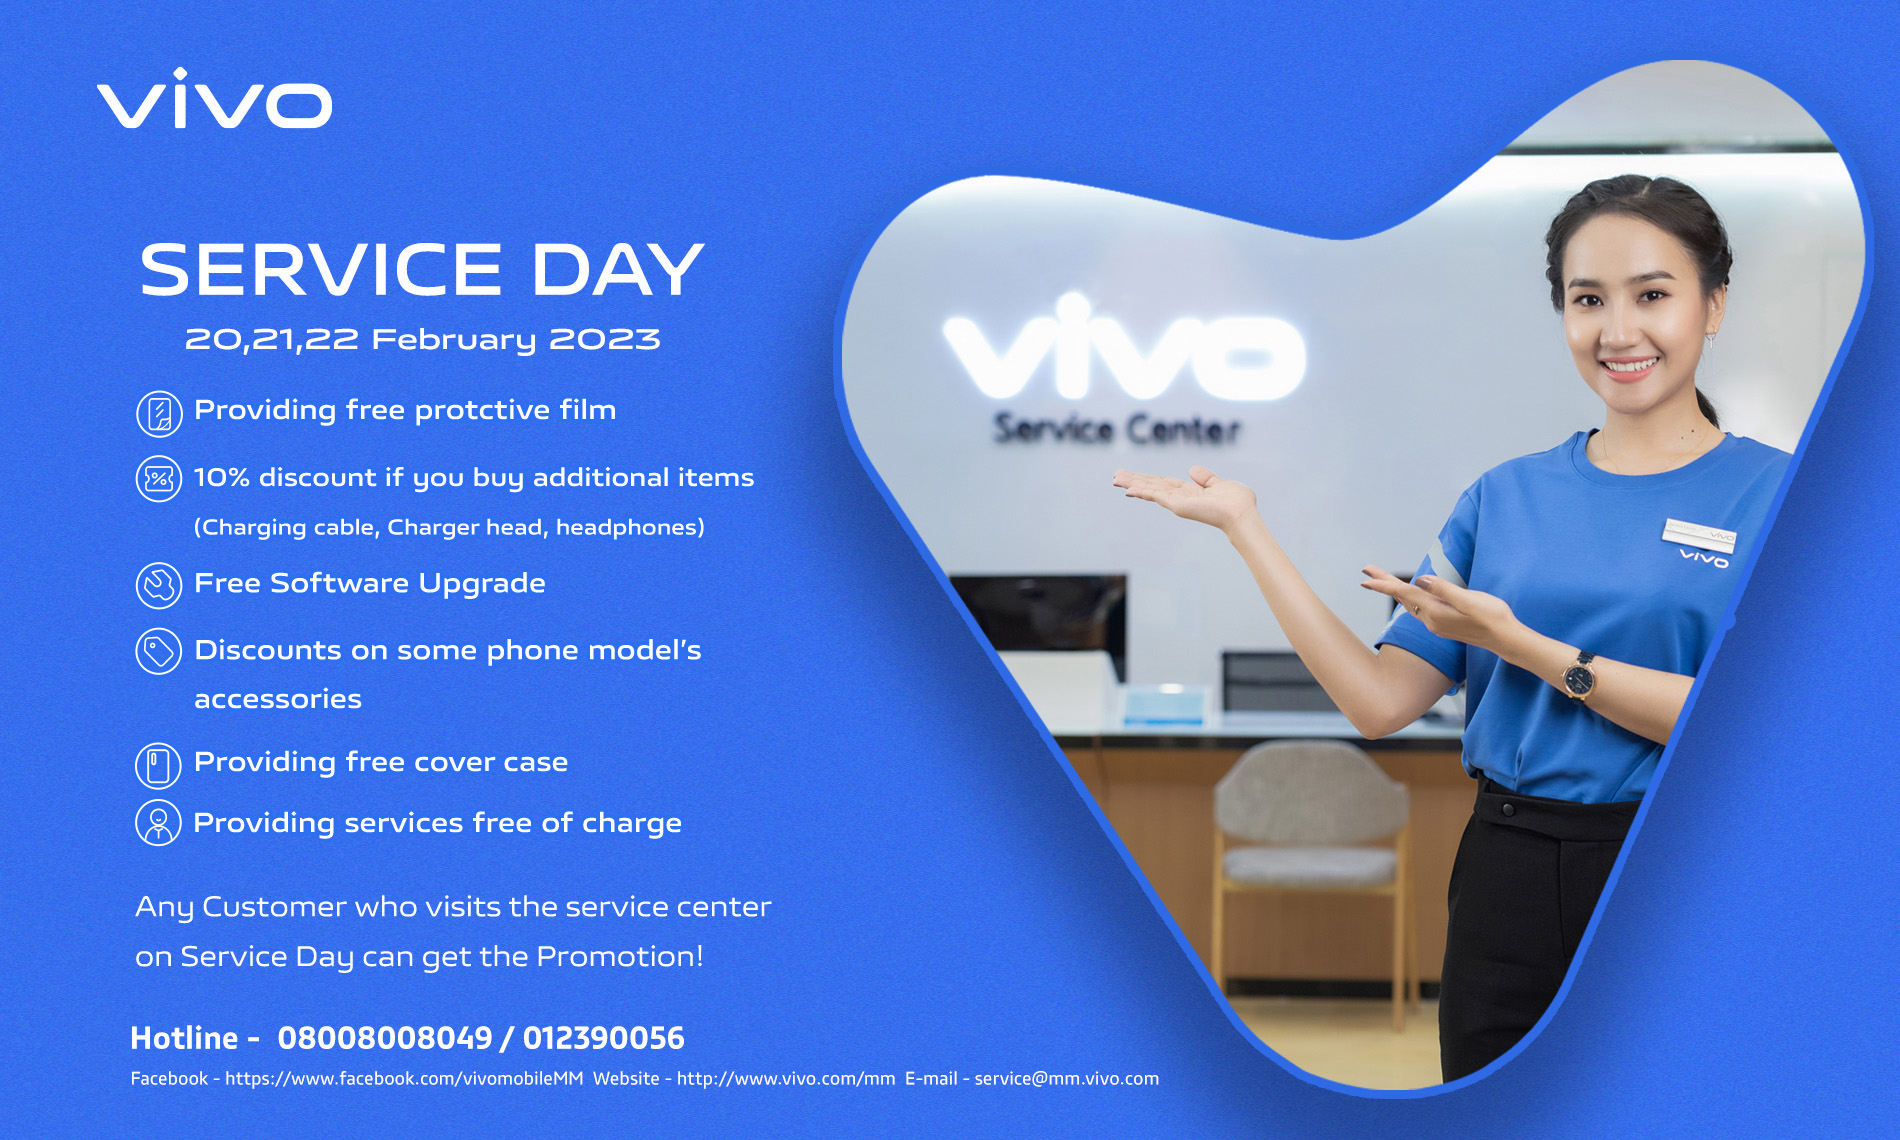 vivo Service Day Benefits in February